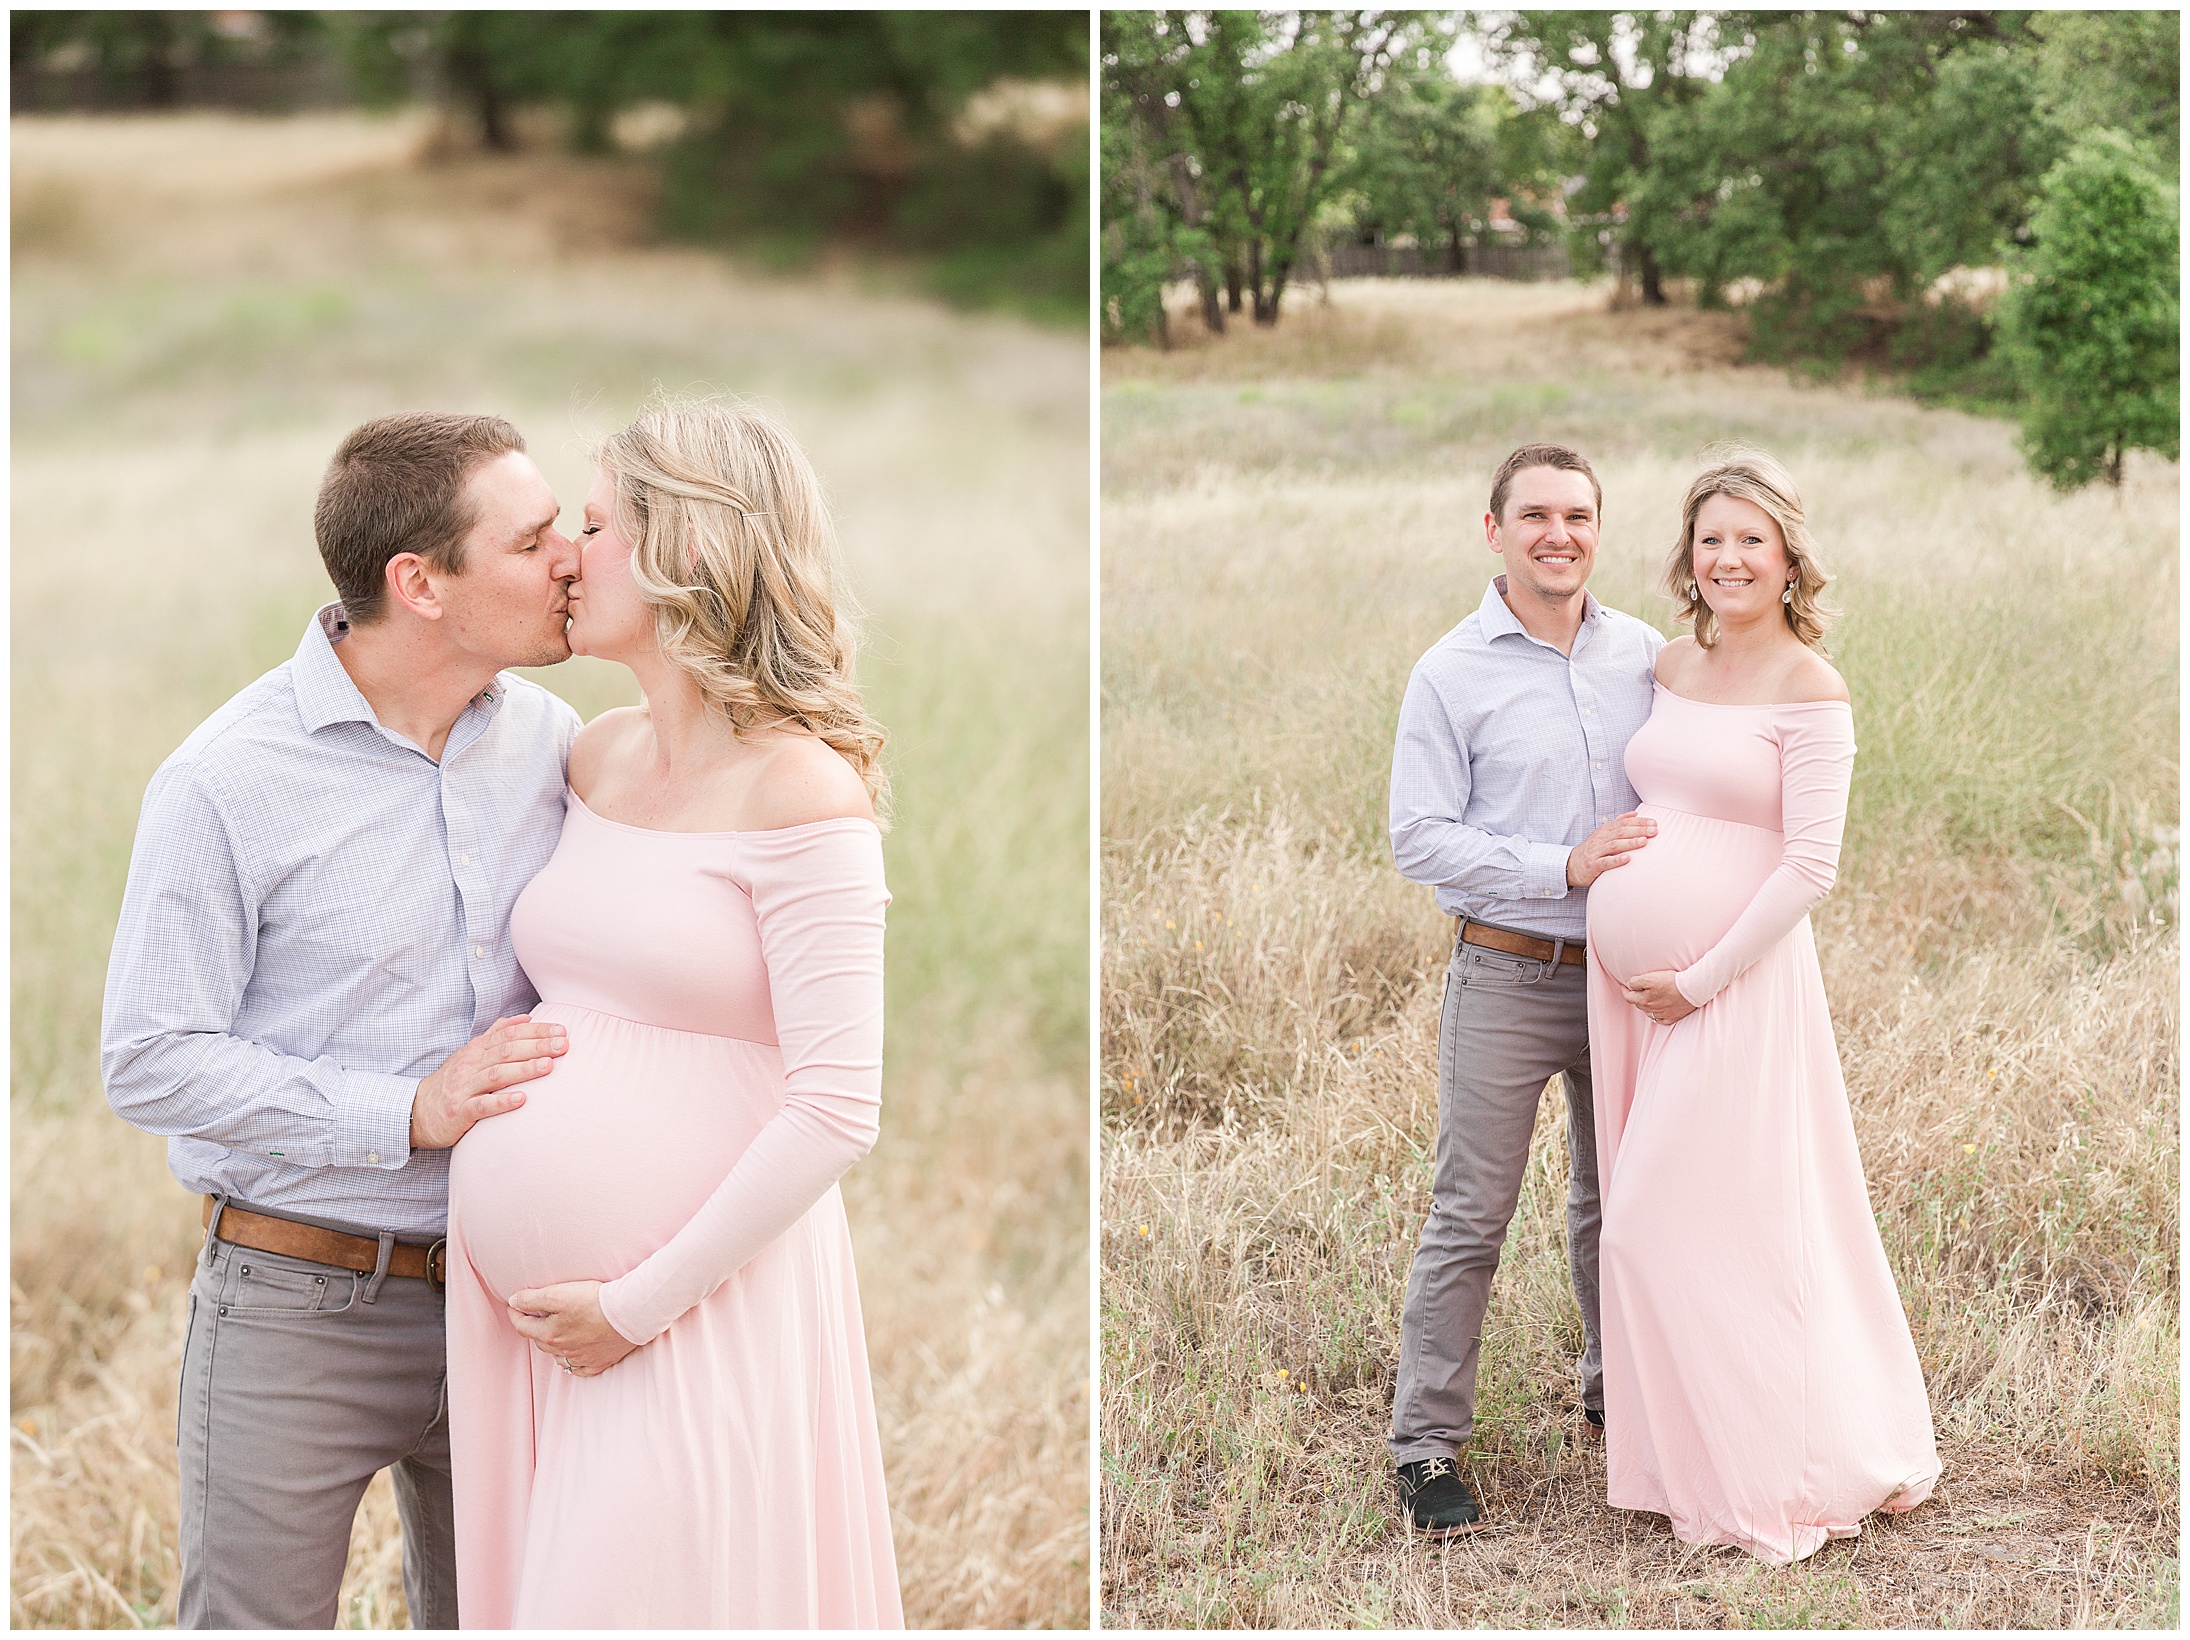 Grass Field Valley Oak Trees Maternity Session Chico California Pink Dress,